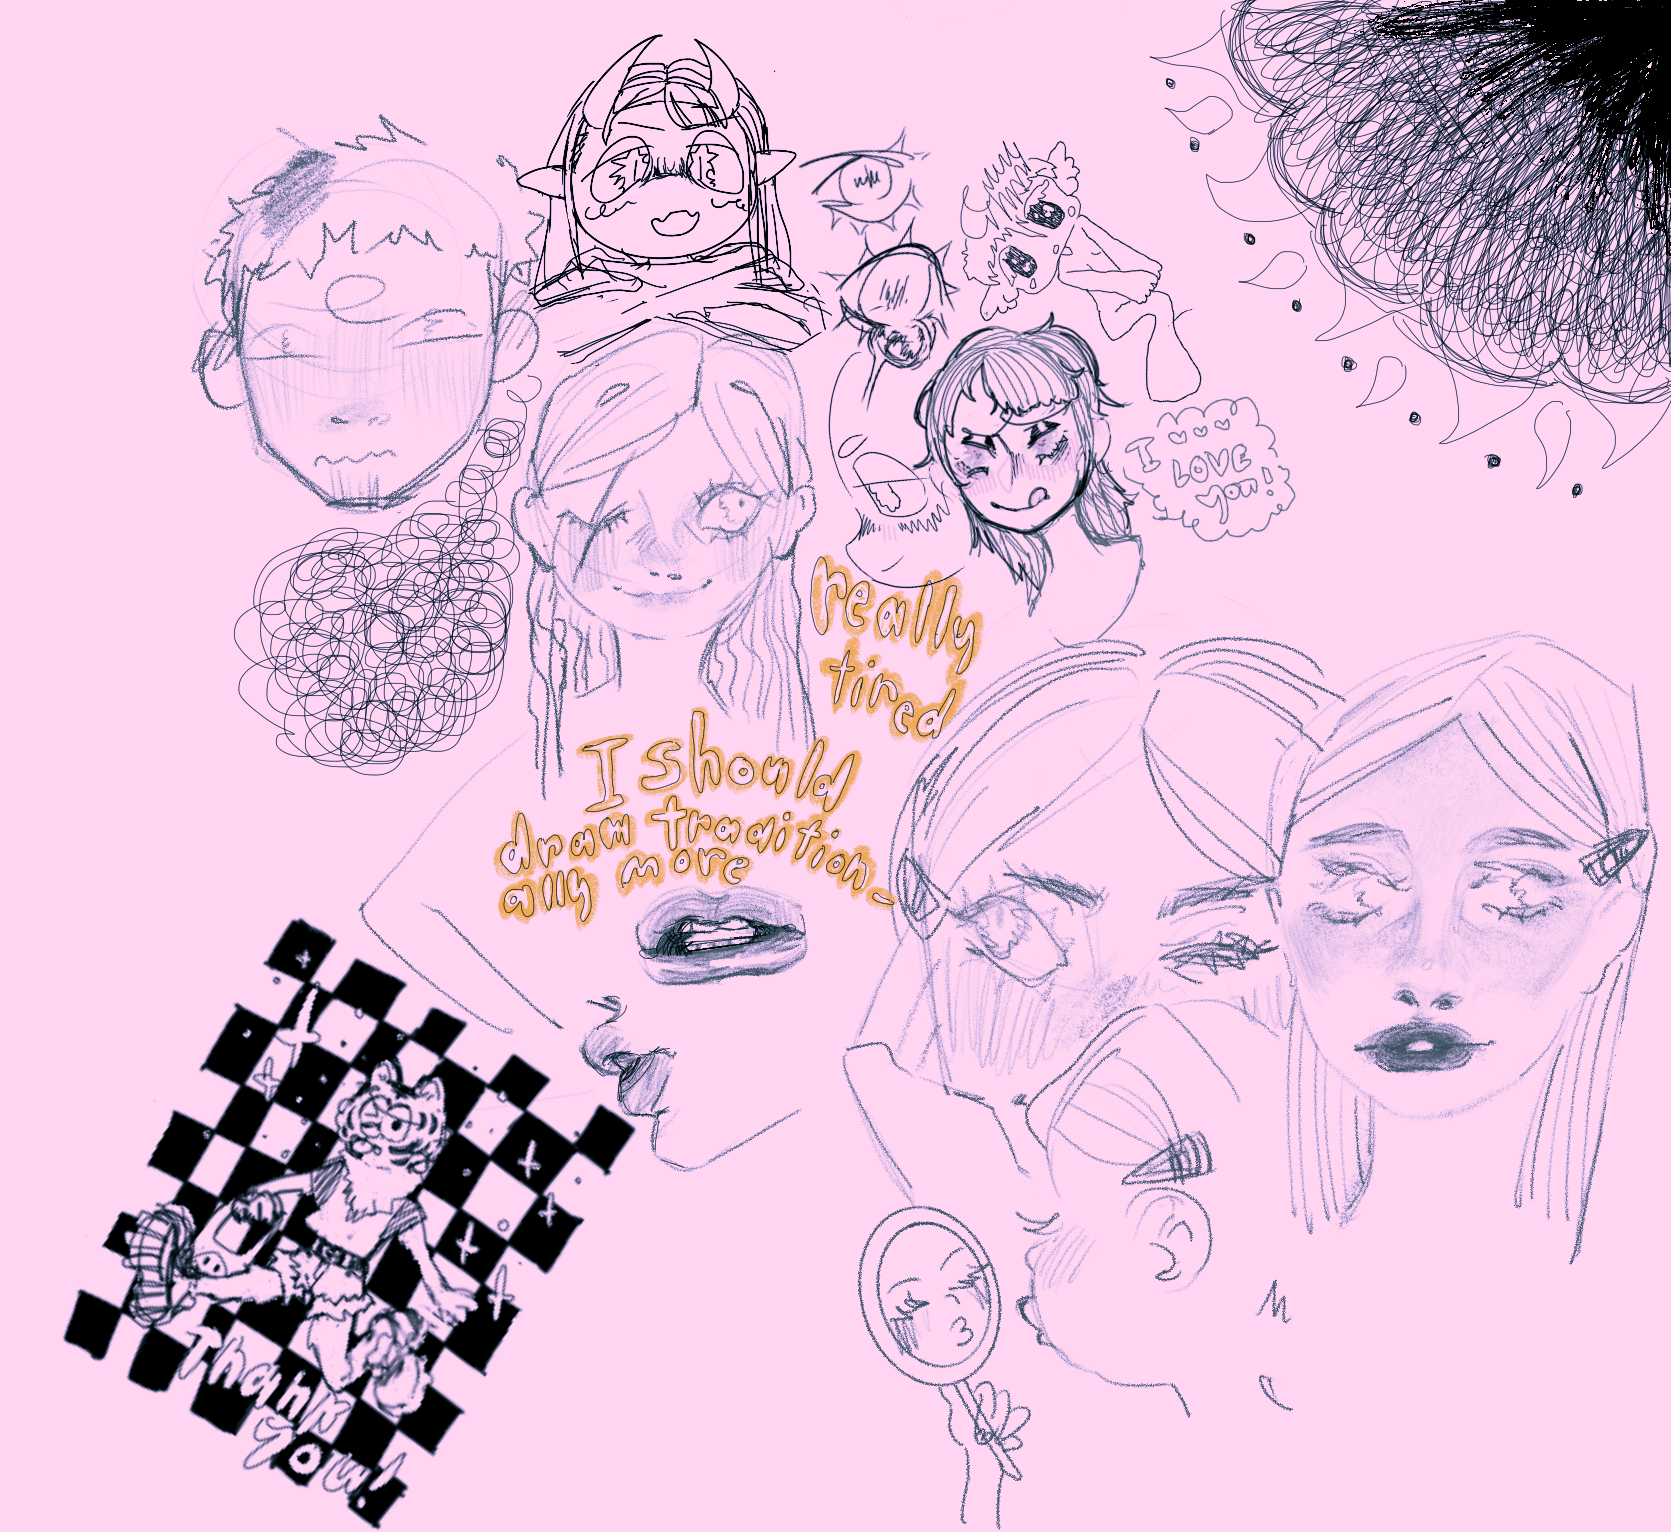 sketch page of various experiments and freeform drawing ... to put it fancifully. i was also discovering i really like using pencil-type brushes and wanted to start drawing traditionally again. i ended up buying a hobonichi shortly after this!